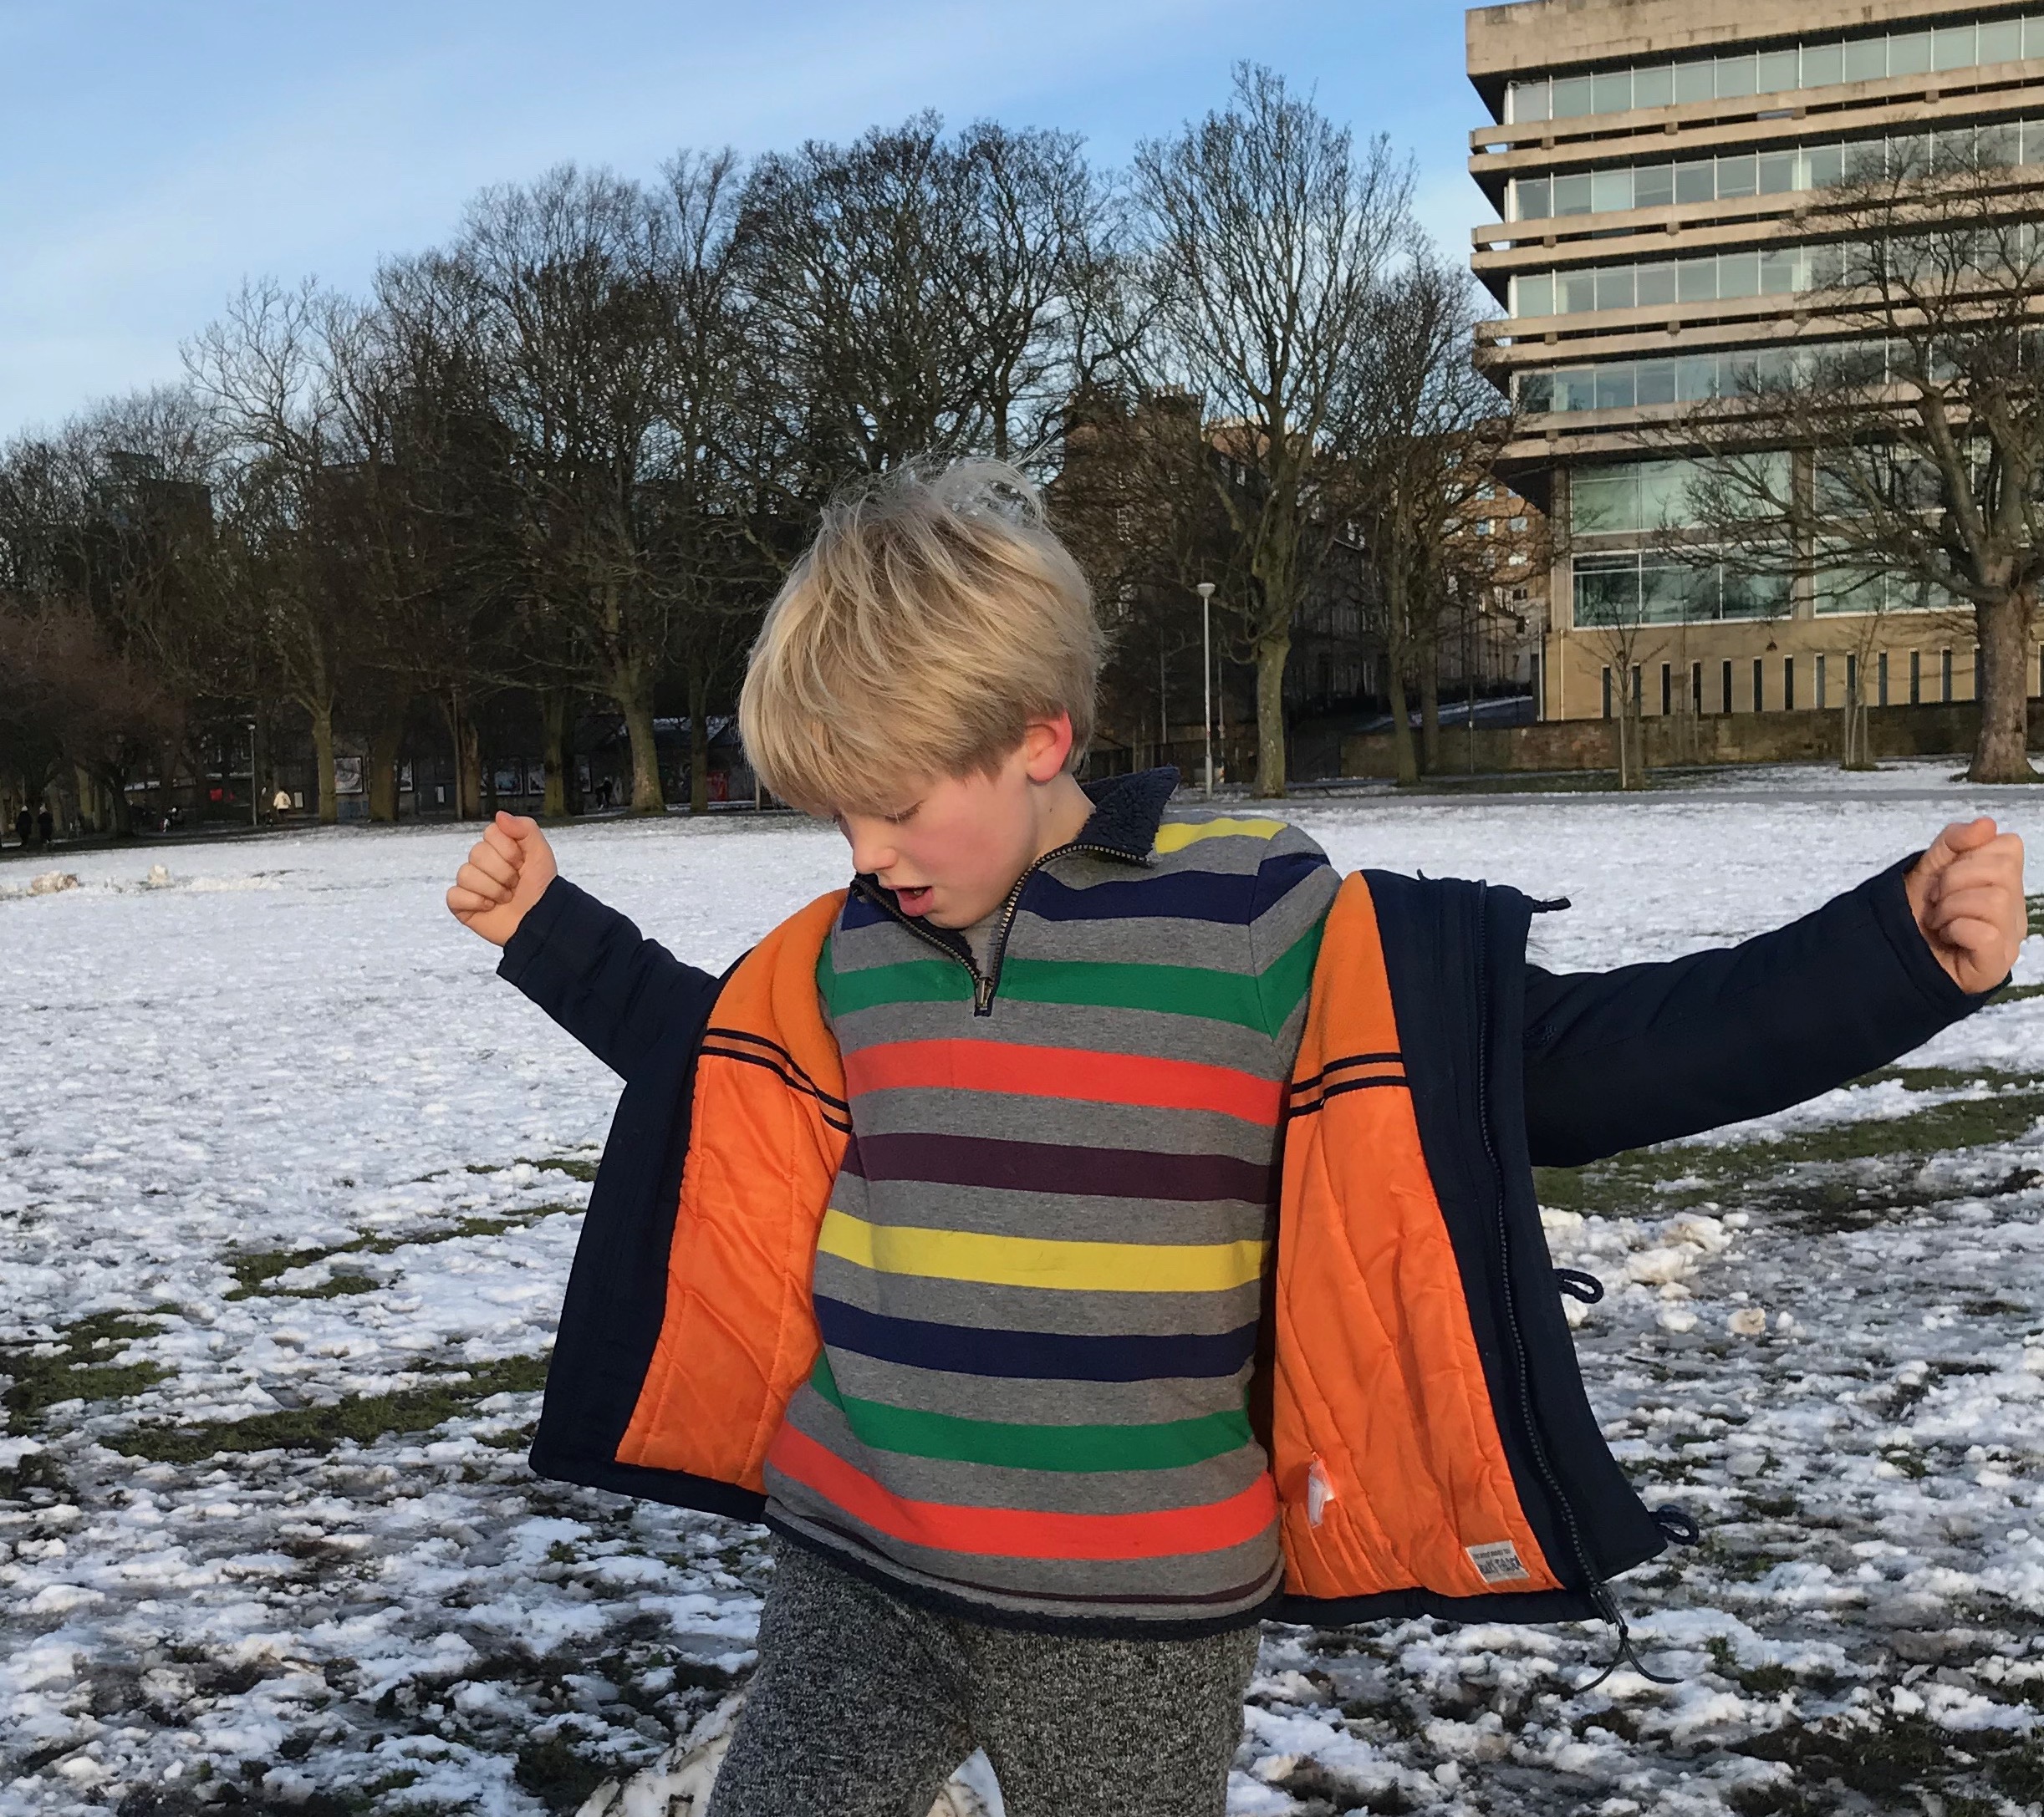 Boy with blond hair playing in the snow with his arms outstretched